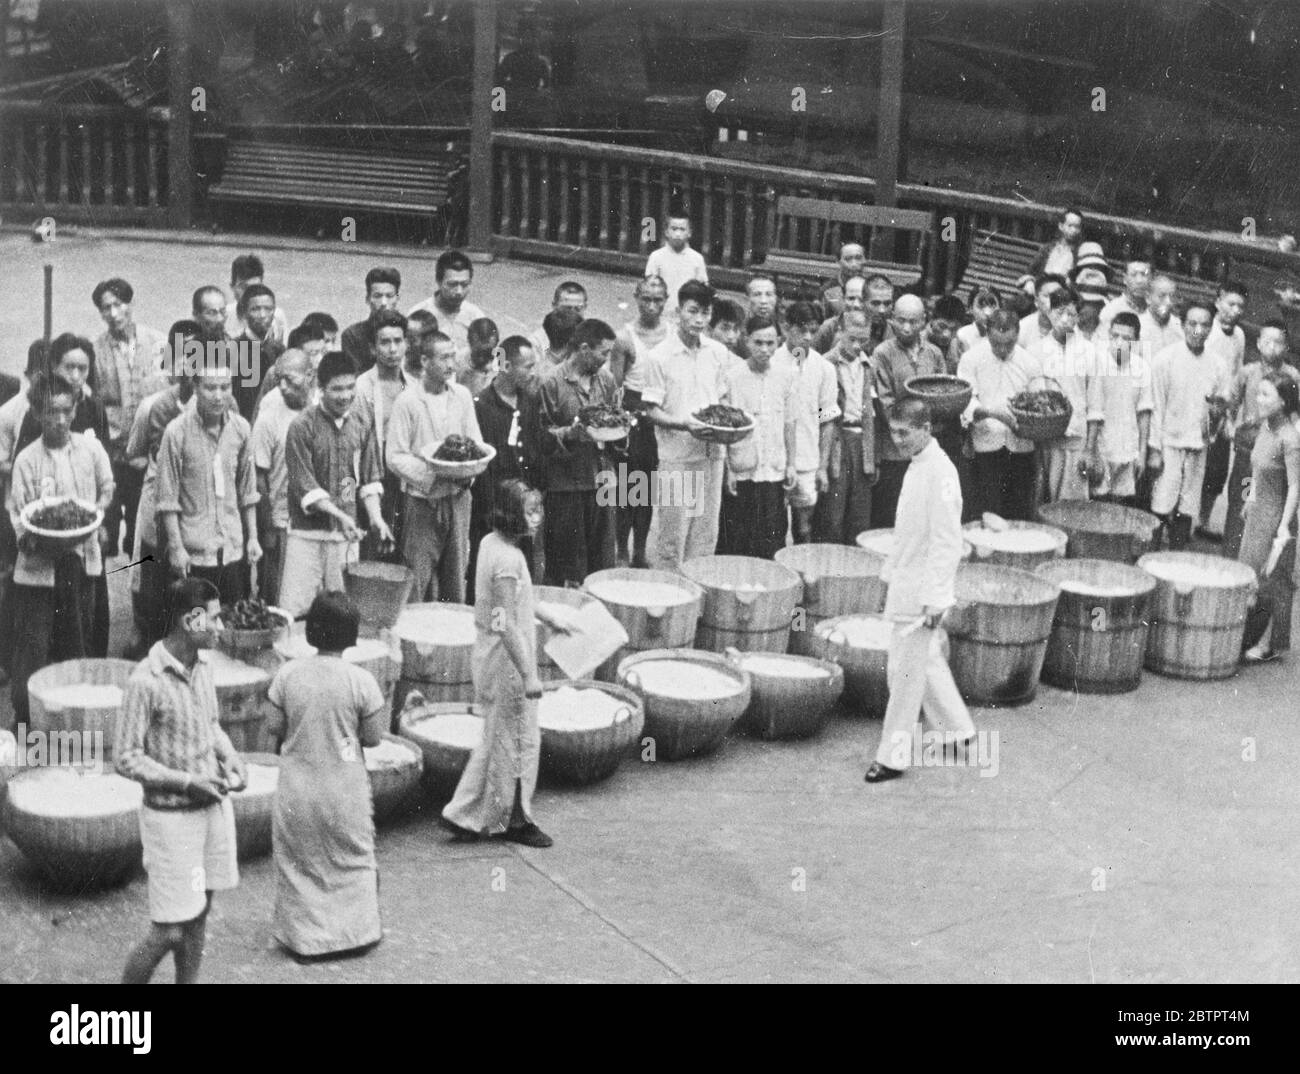 Food for war victims. An array of large bowls filled with food which gladdened the eyes of hungry Chinese refugees awaiting their rations in Shanghai. 25 November 1937 Stock Photo